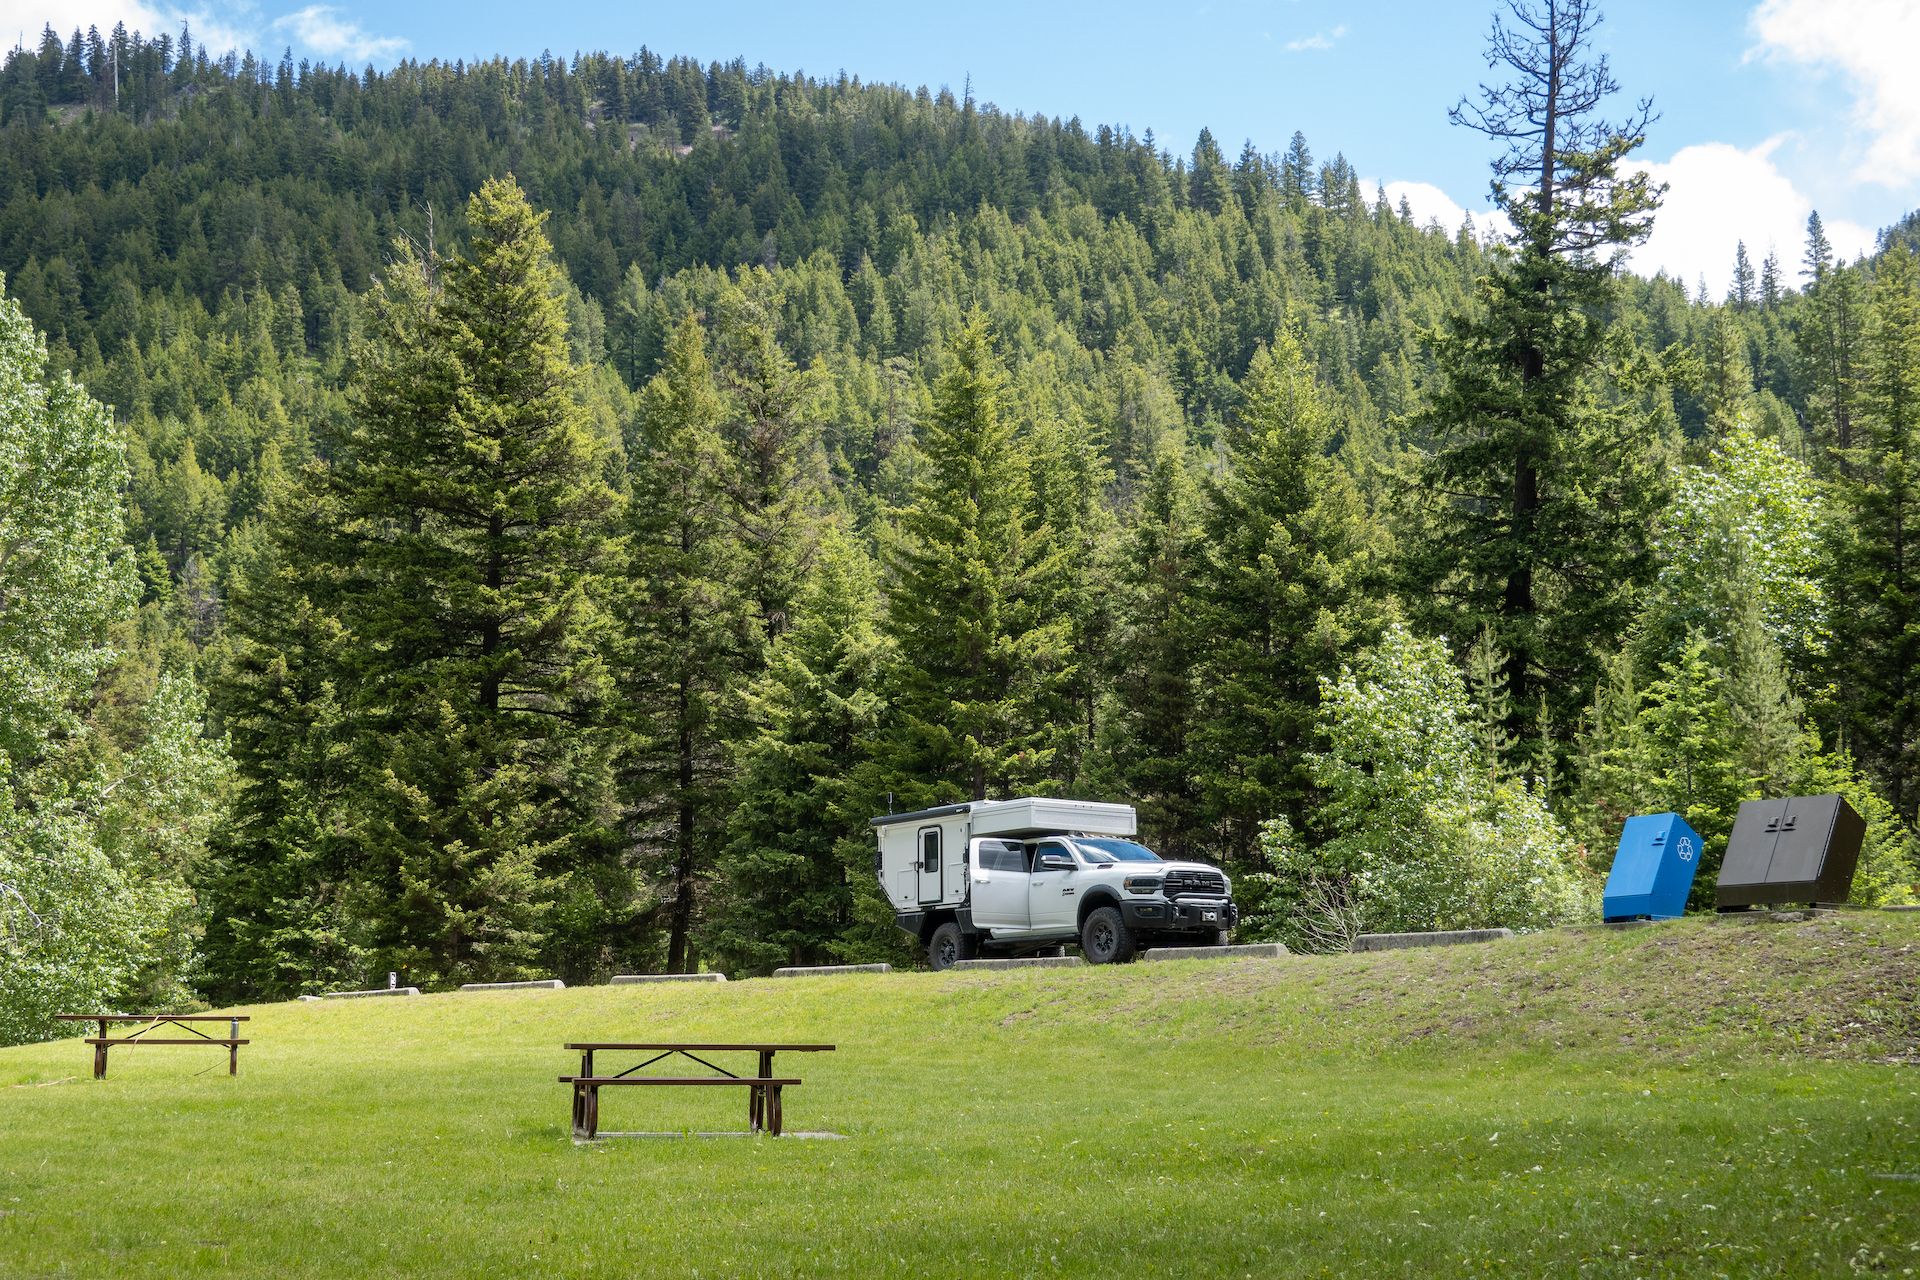 The province of British Colombia offers many rest areas on its highways and they are always spotless!